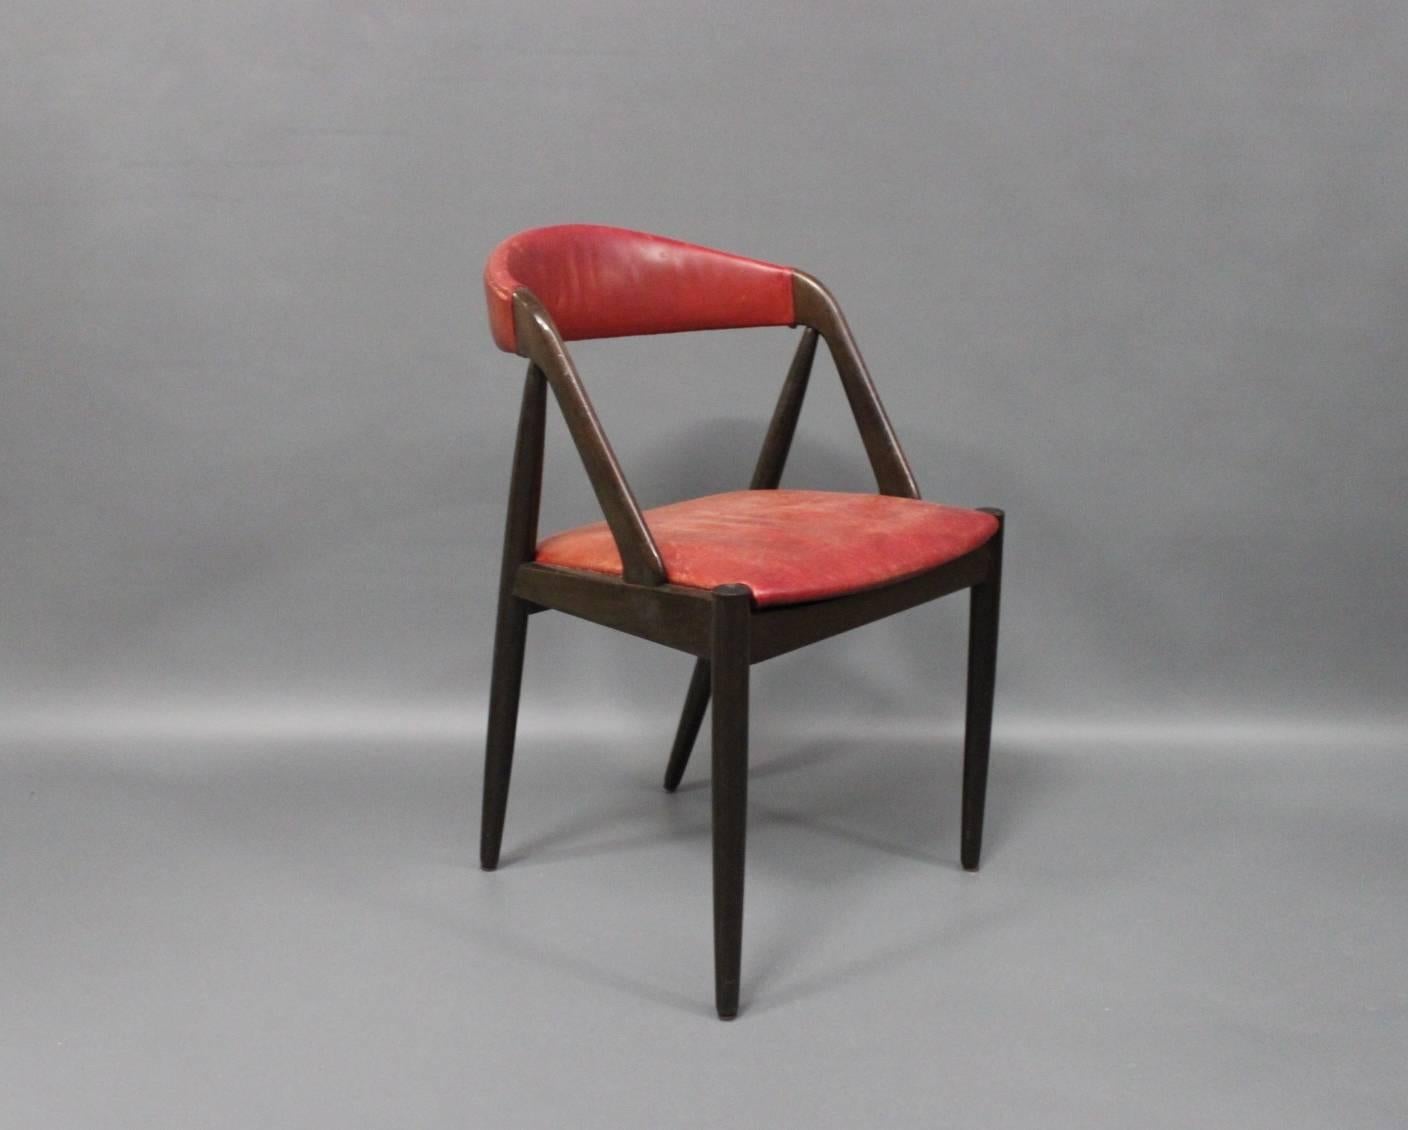 Scandinavian Modern Set of Four Dining Room Chairs, Model 31 by Kai Kristiansen, 1960s For Sale